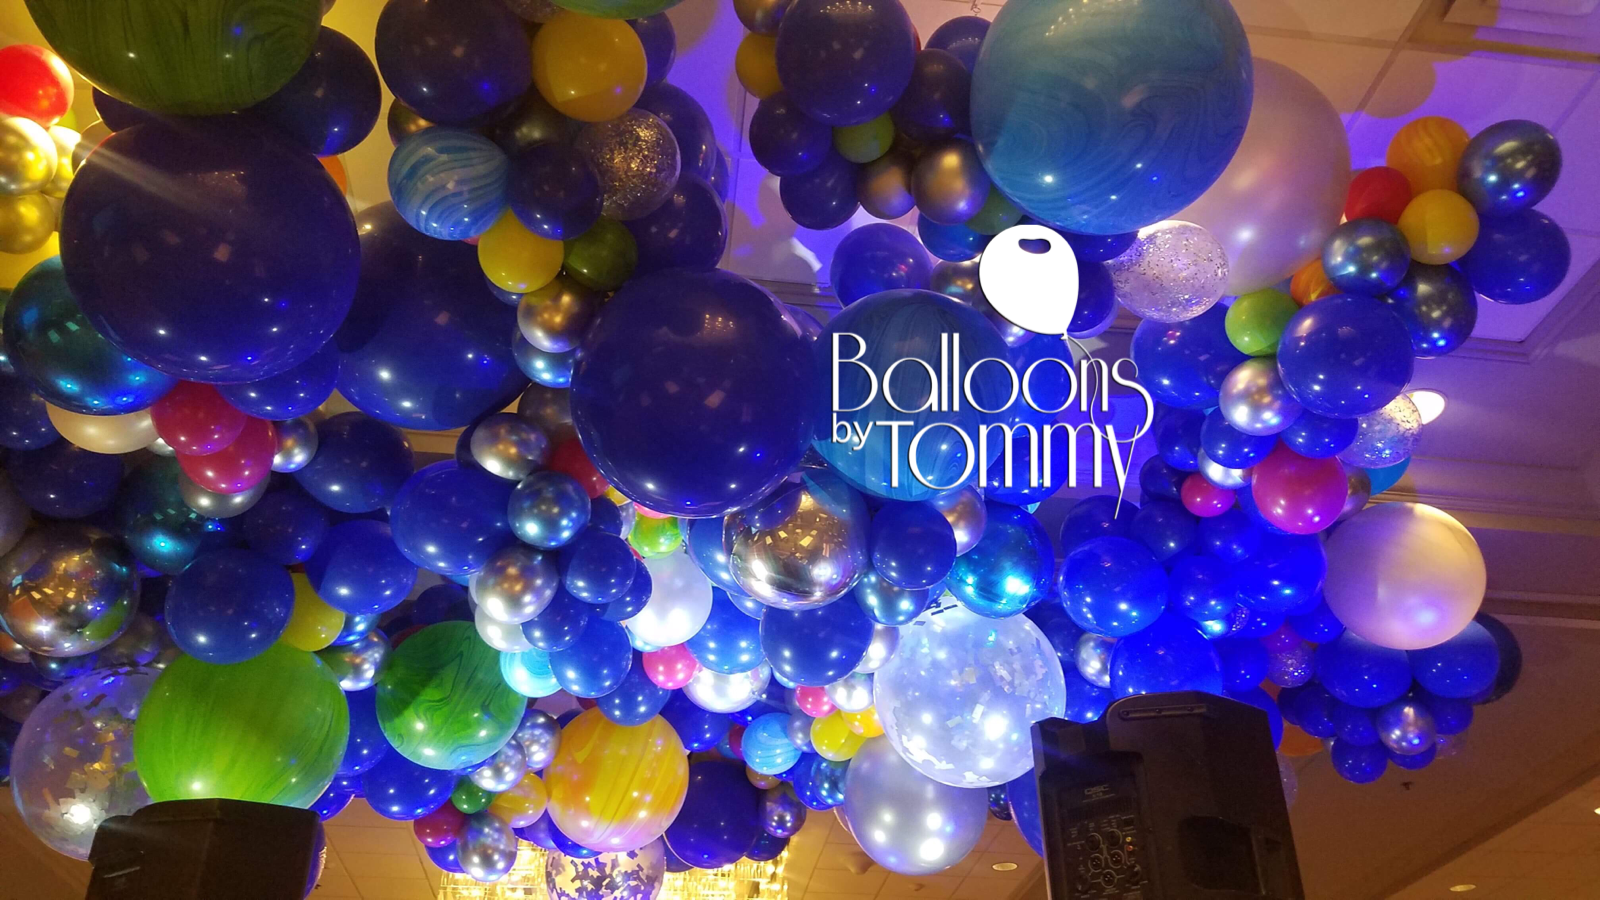 Balloons by Tommy 